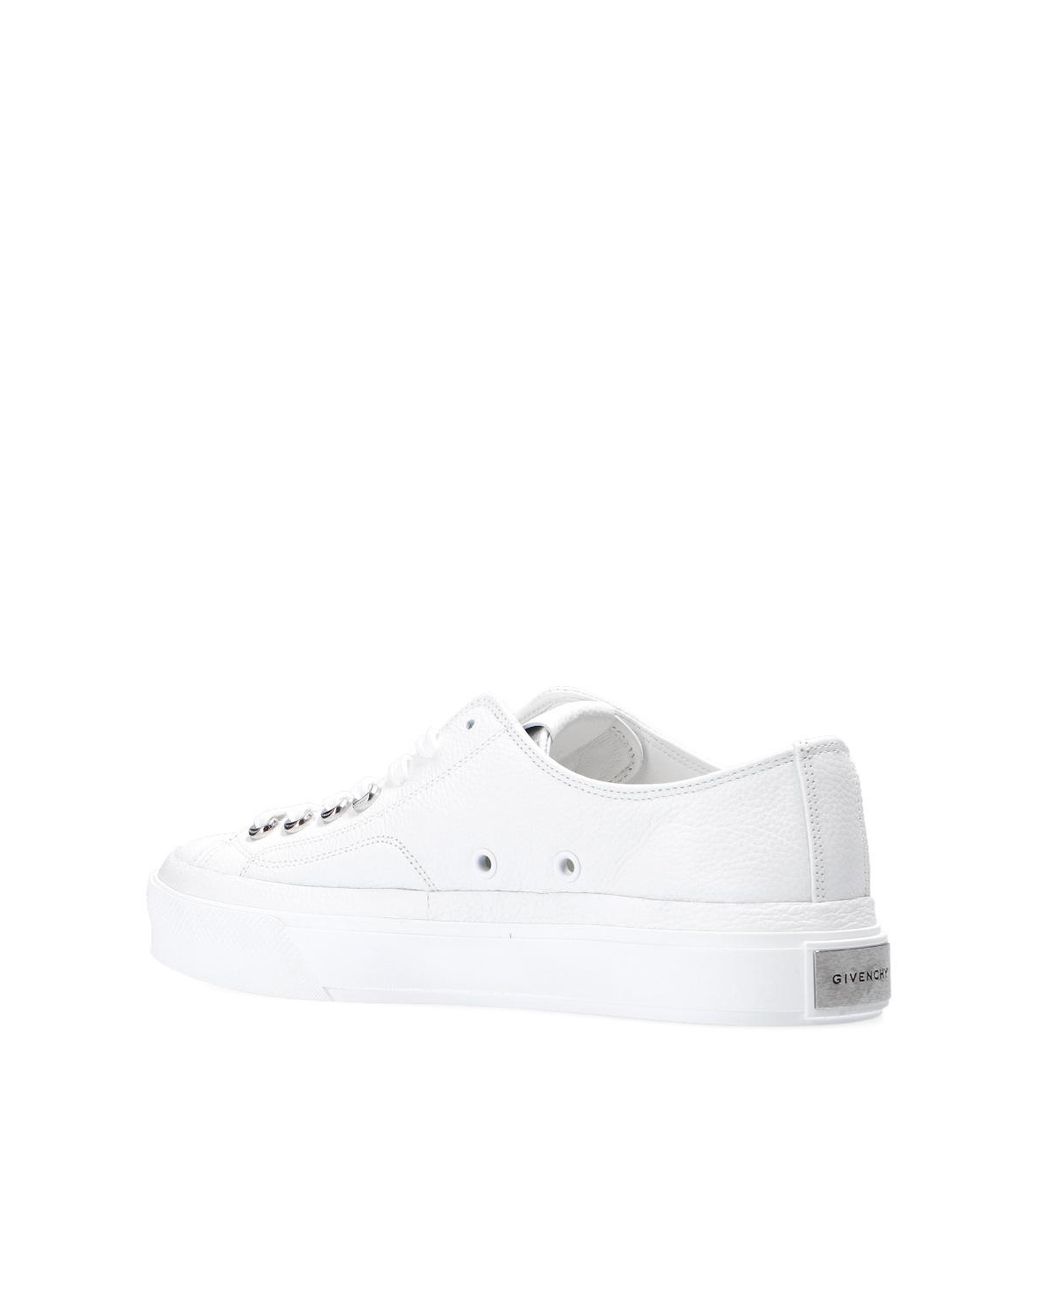 Givenchy 'city Low' Sneakers in White | Lyst